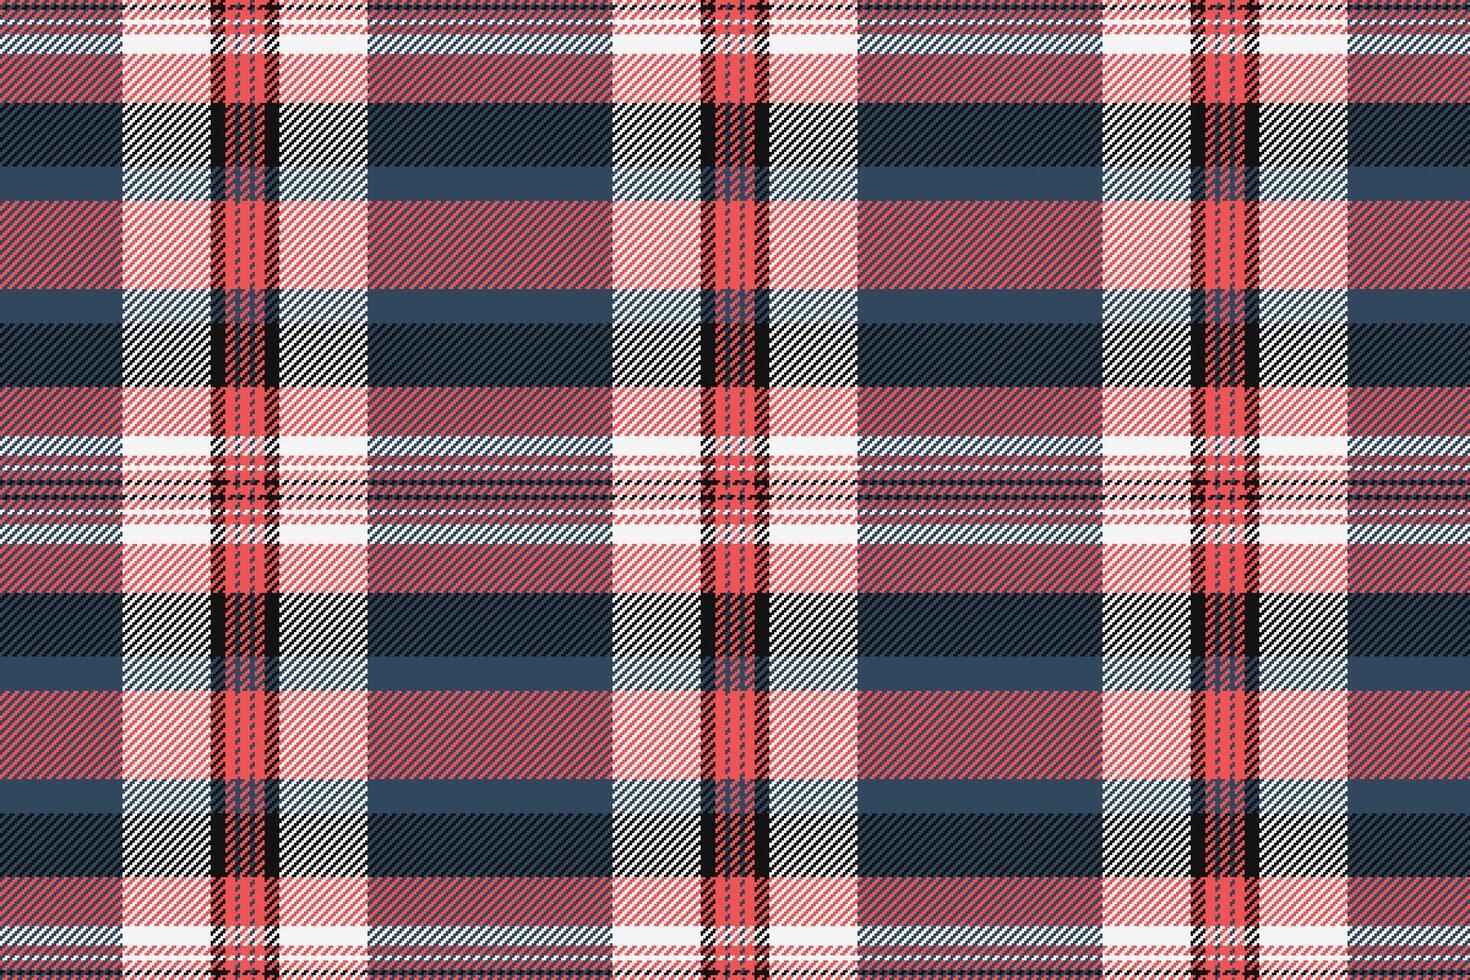 Fabric pattern vector of tartan texture check with a textile background plaid seamless.